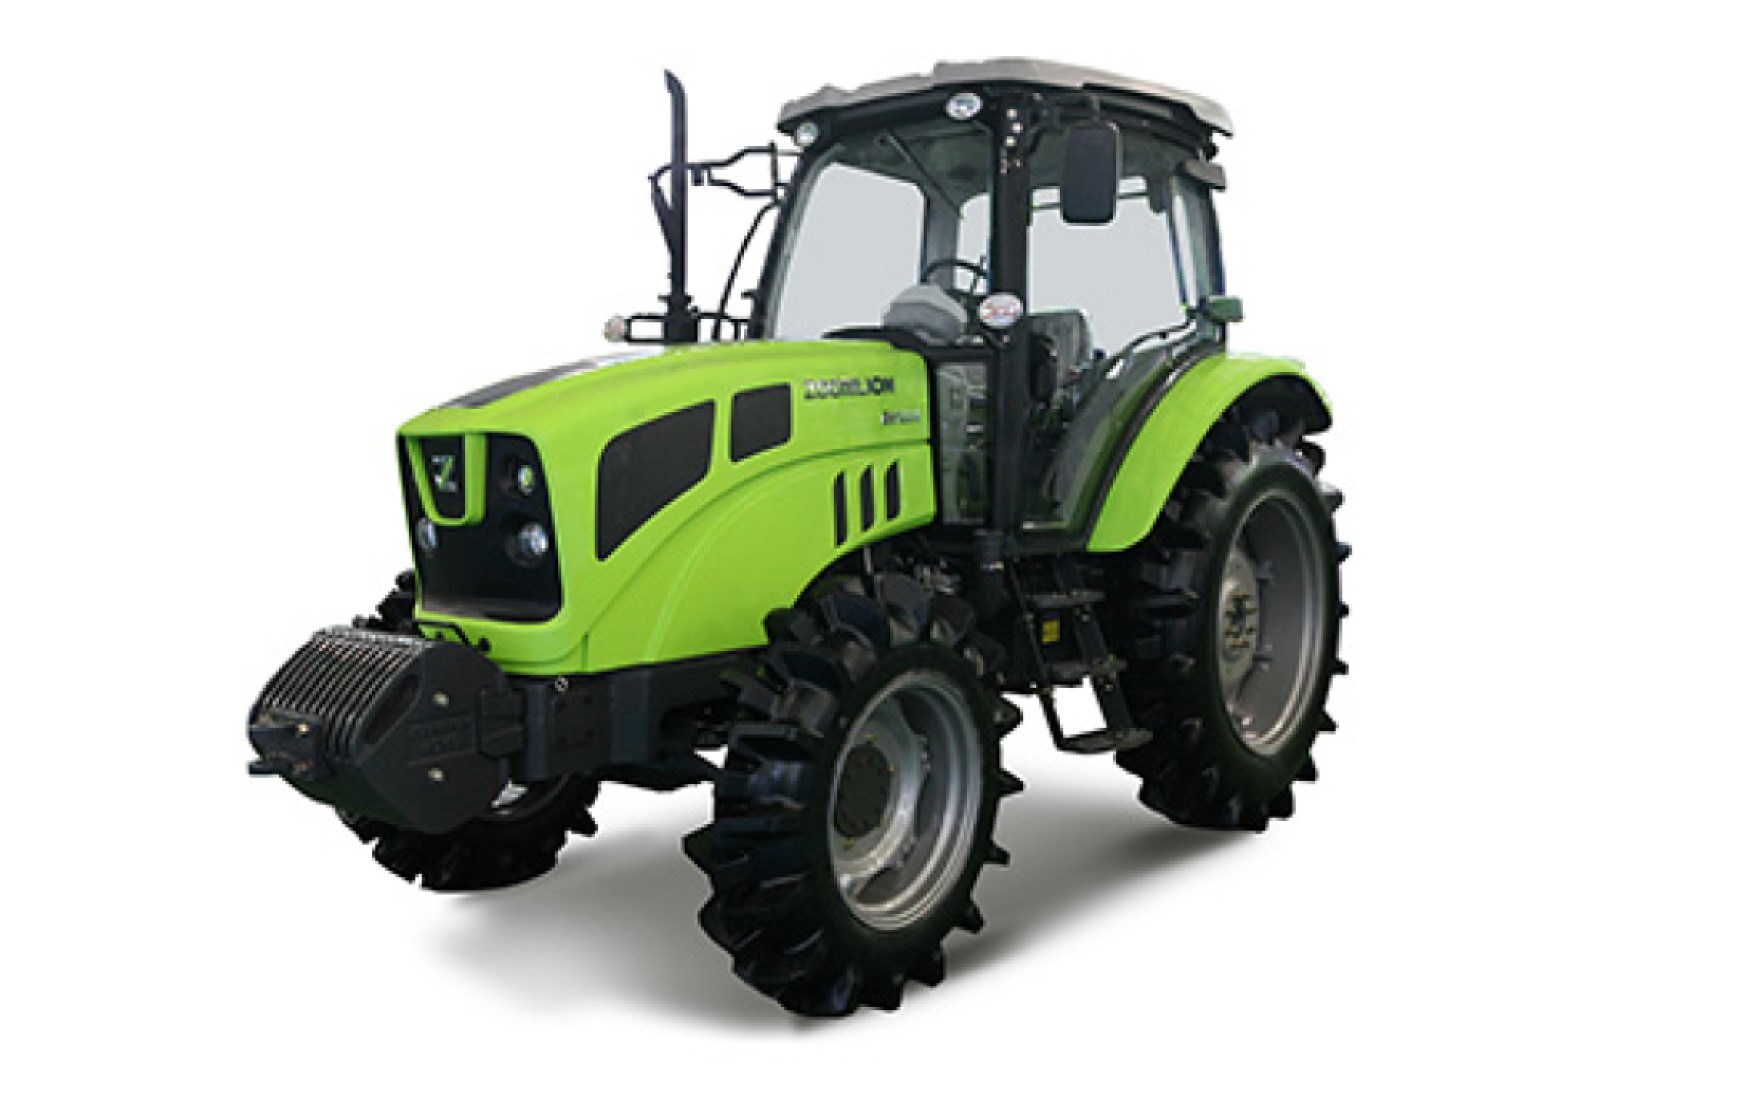 Wheeled Tractor Rk754-a Mini Front End Loader Compact Tractors